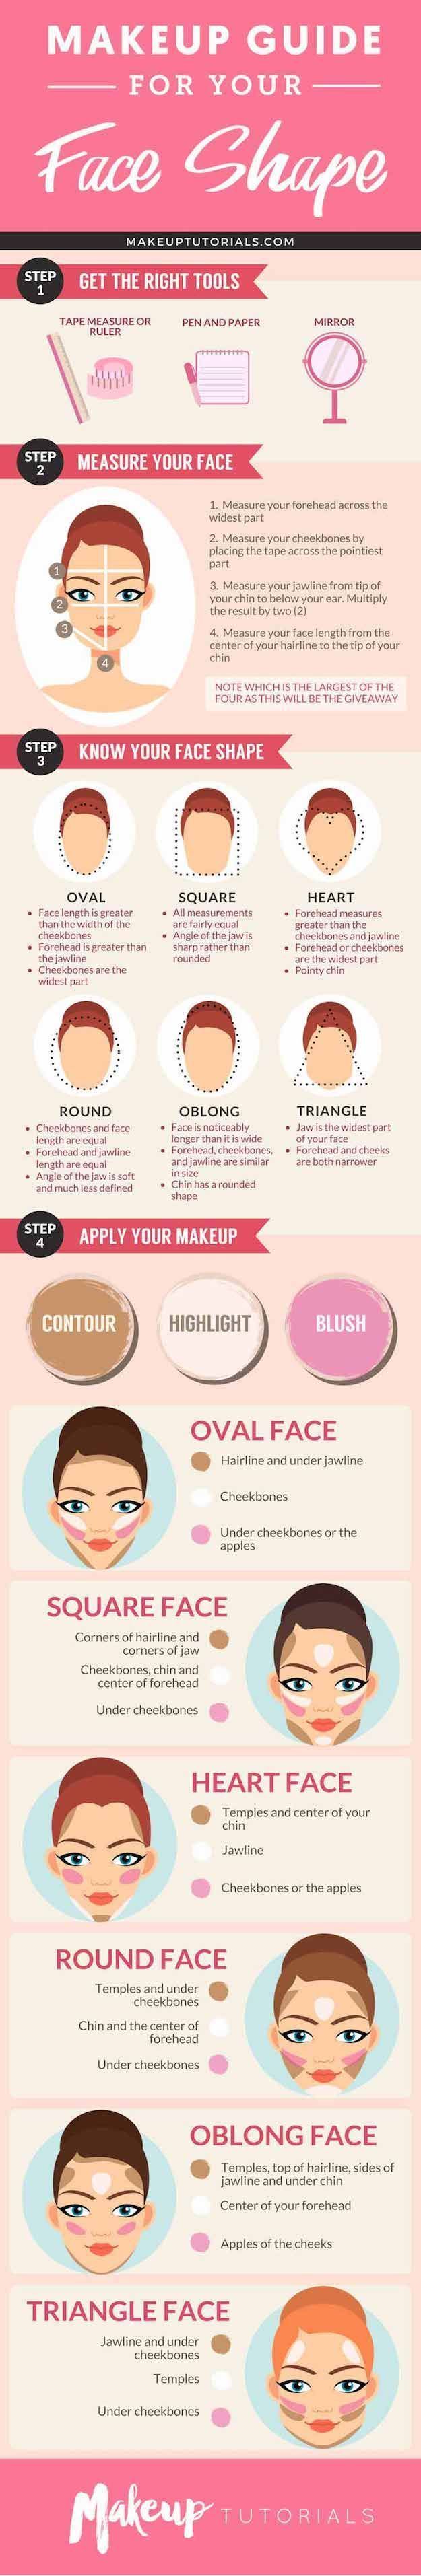 Best Makeup Tutorials And Beauty Tips From The Web